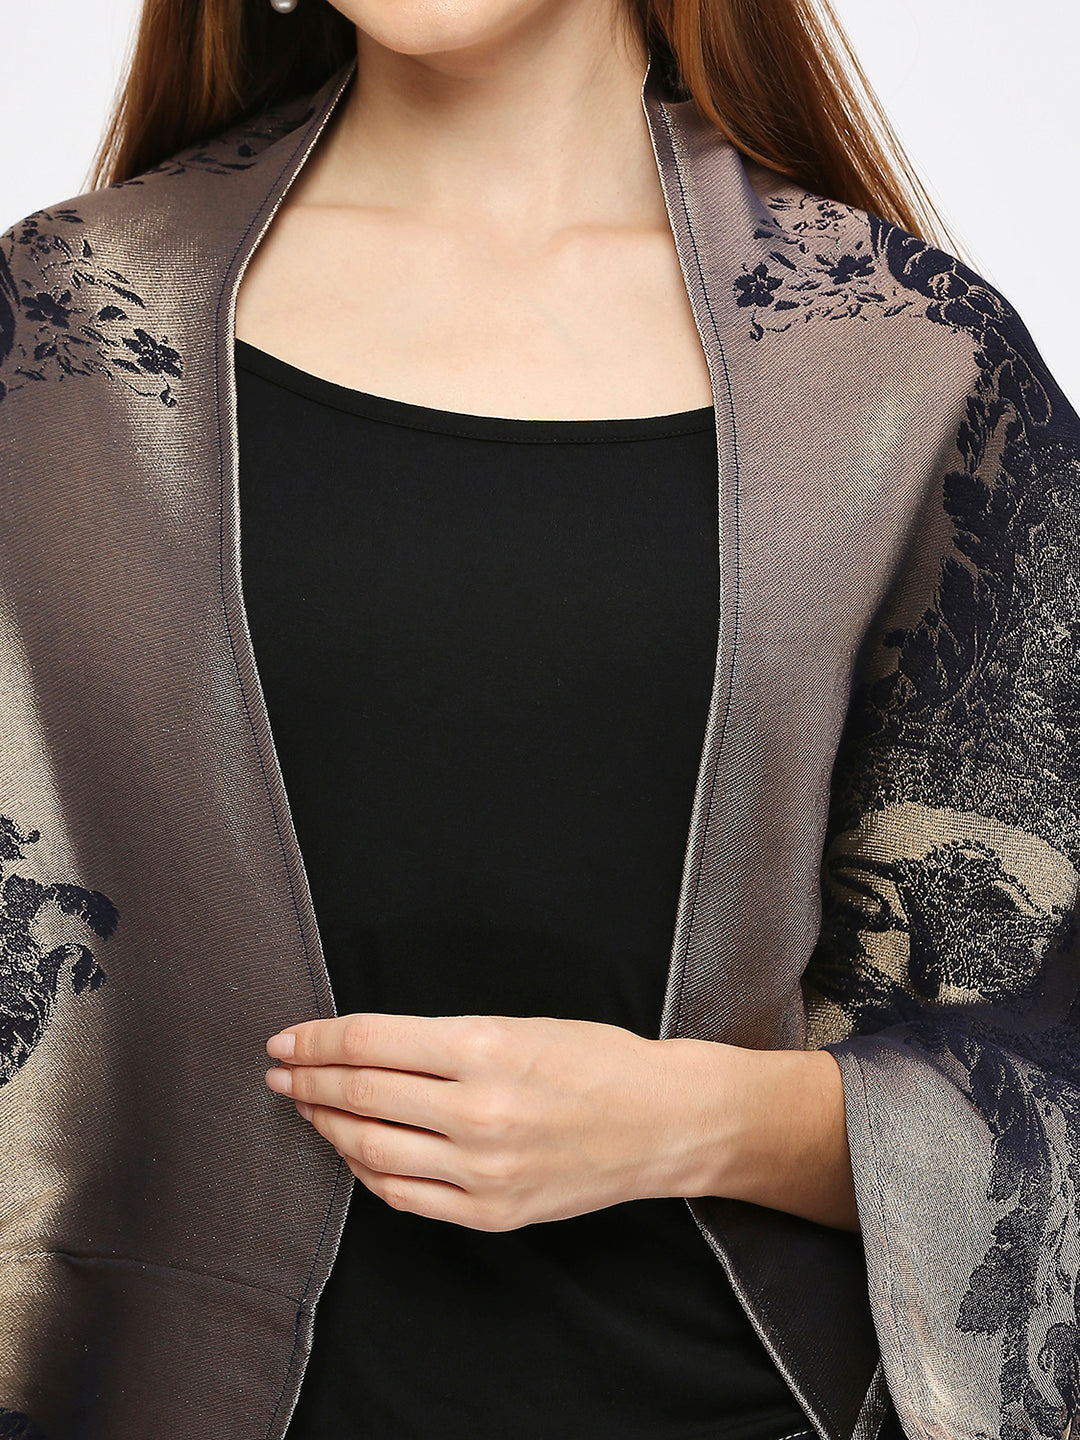 Brocade French Patterned Navy Cape